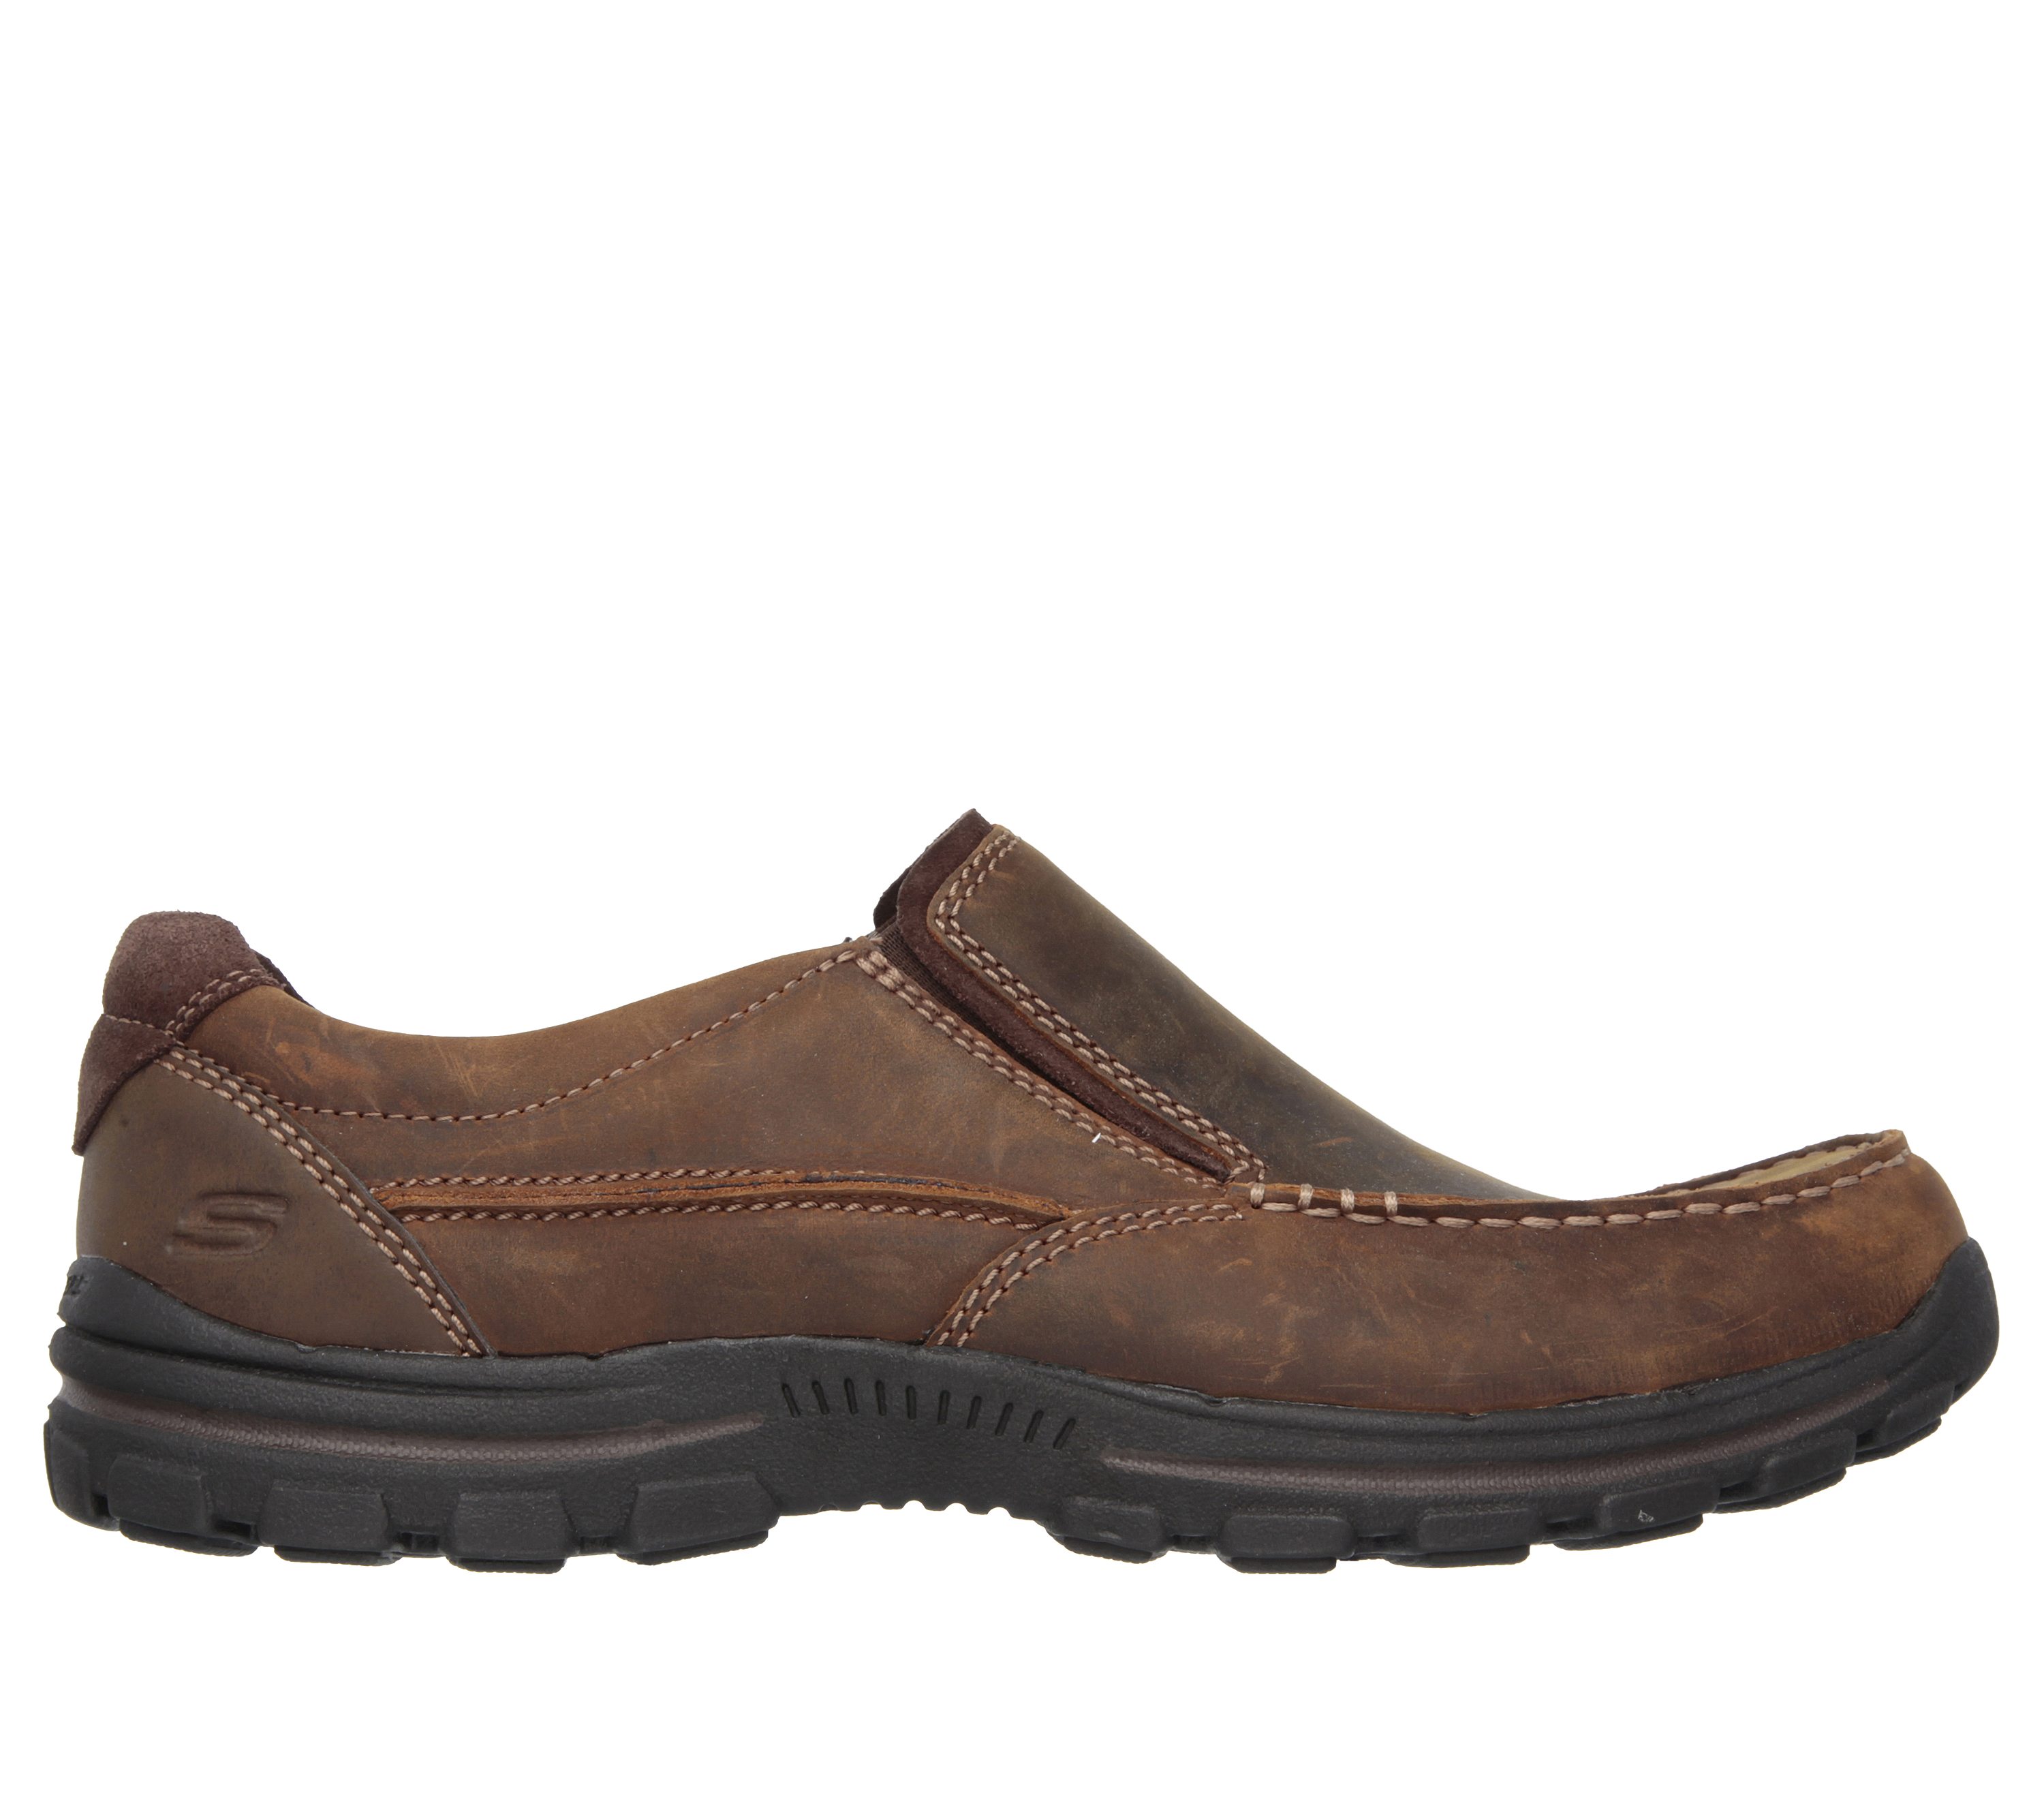 Shop the Relaxed Fit: Braver - Rayland | SKECHERS